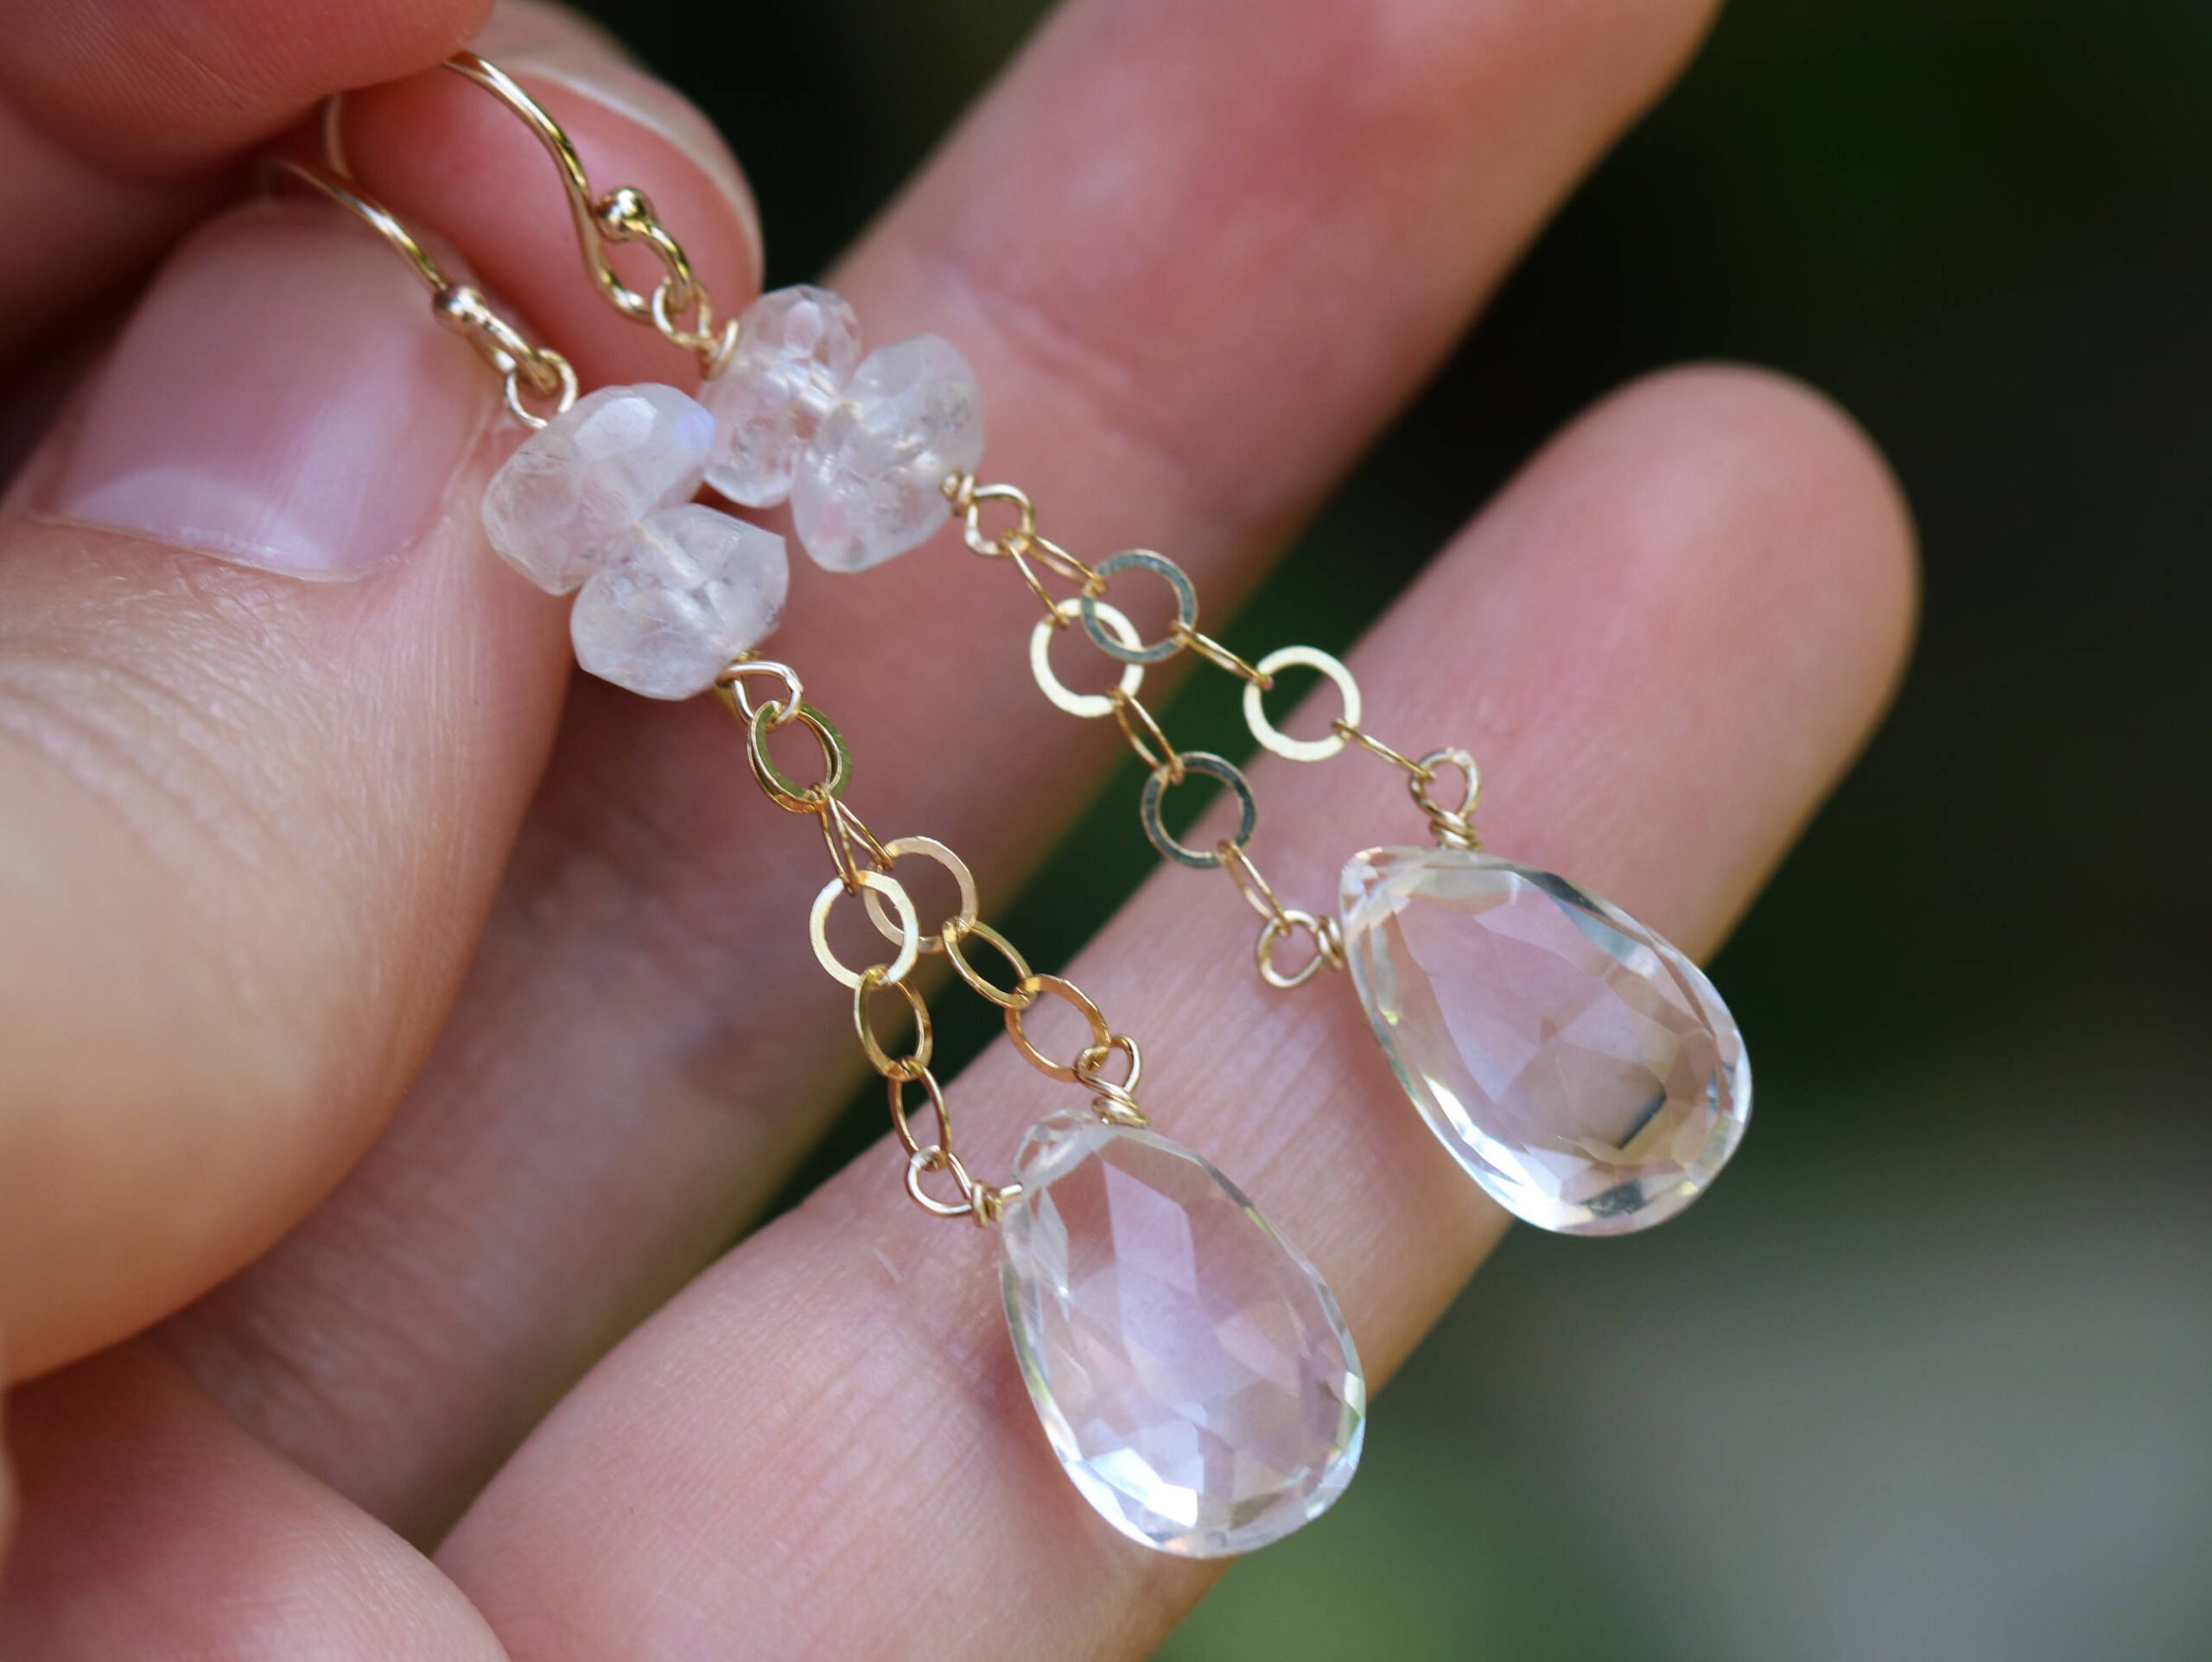 Natural Rock Crystal Quartz with Moonstone Small Simple Dangle Earrings